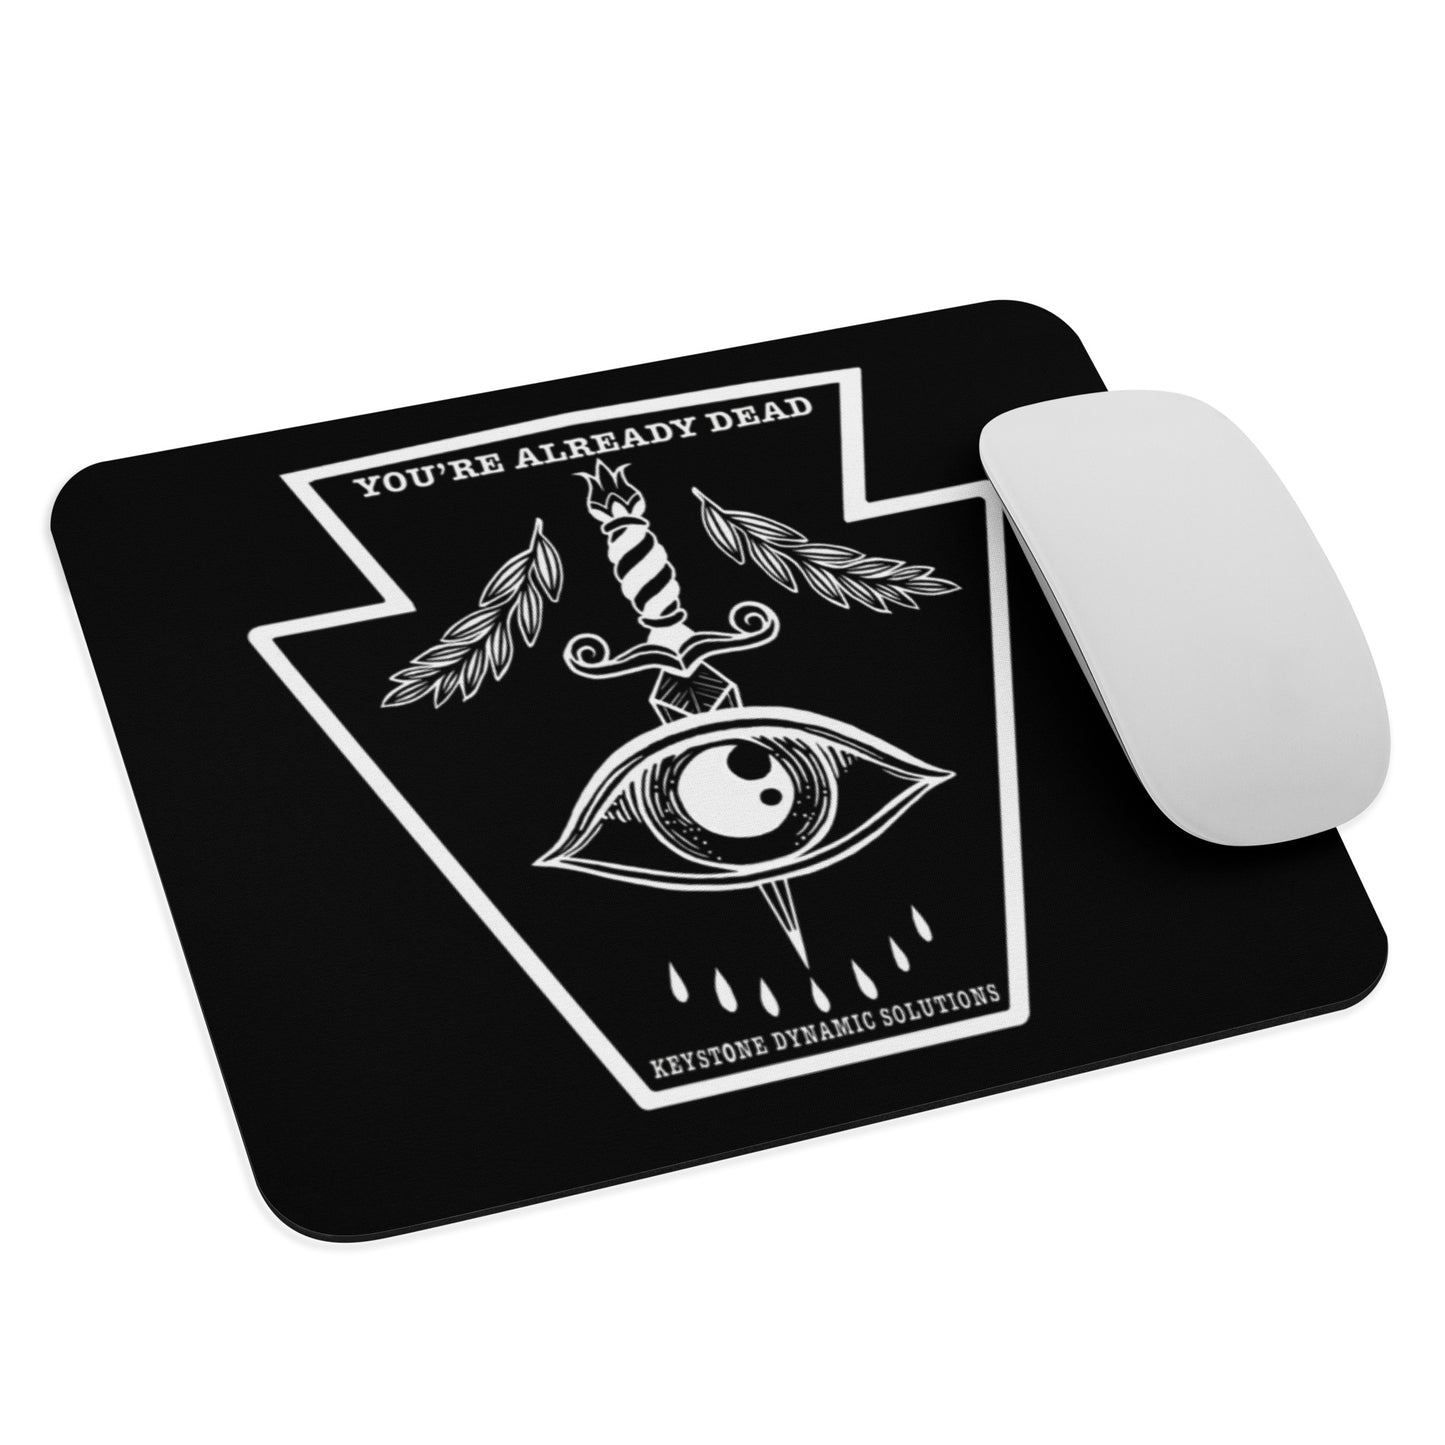 Dont Blink mouse pad